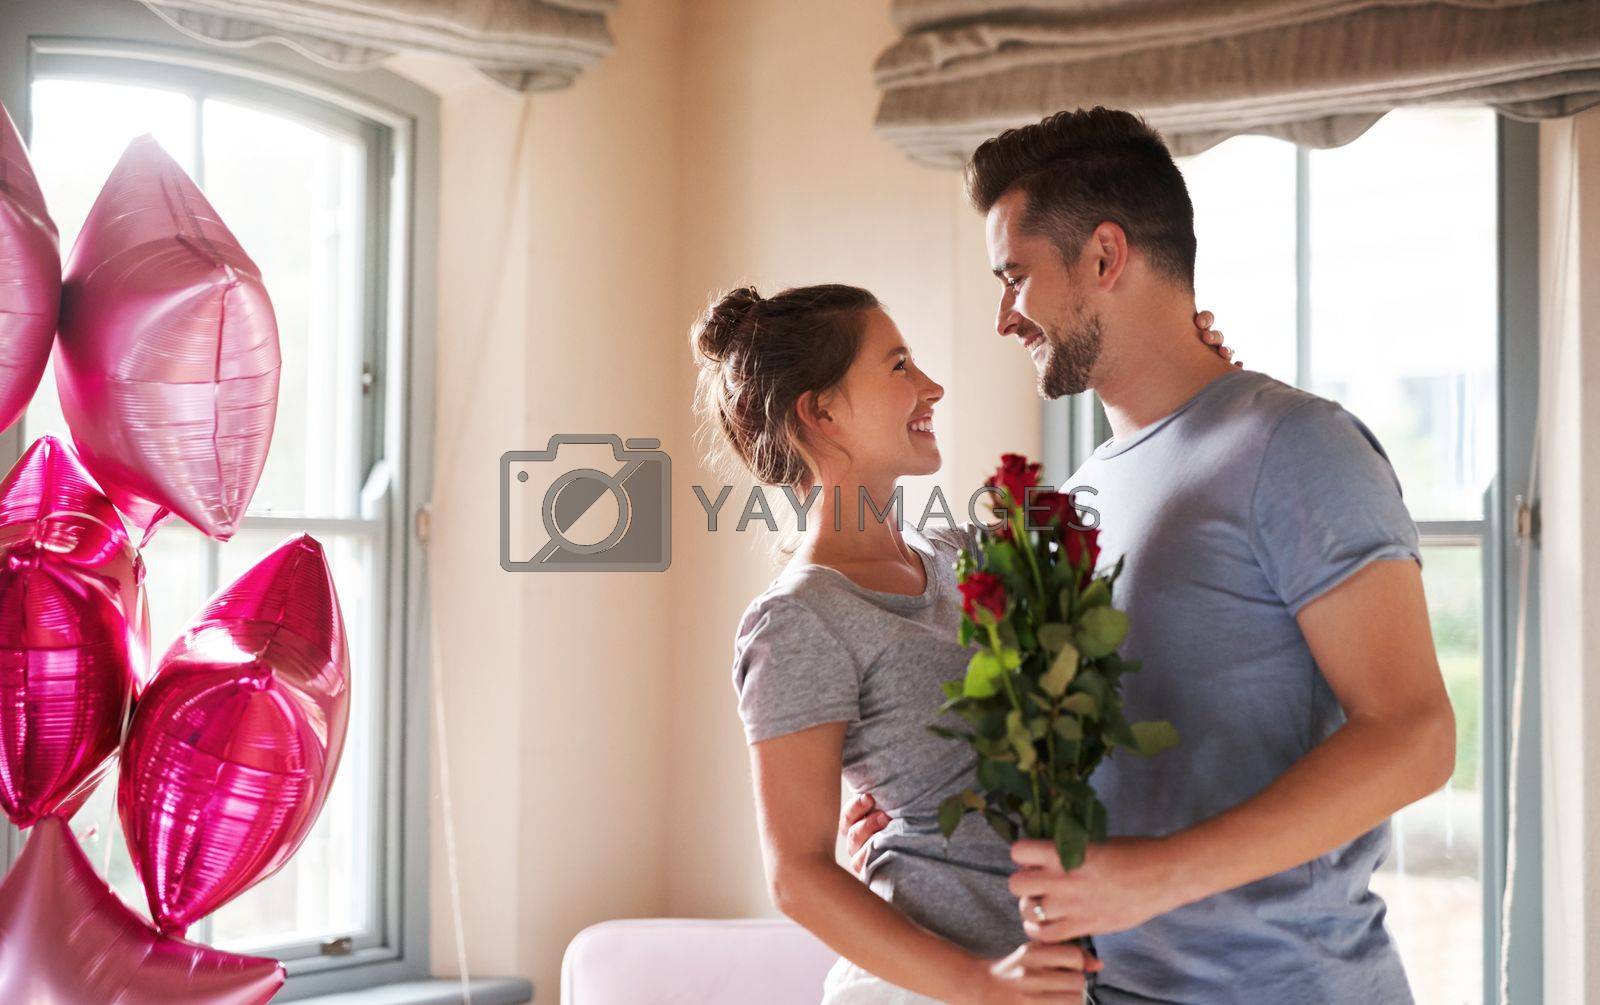 Royalty free image of Each day is a celebration of our love. a young man surprising his girlfriend with balloons and roses in their bedroom at home. by YuriArcurs